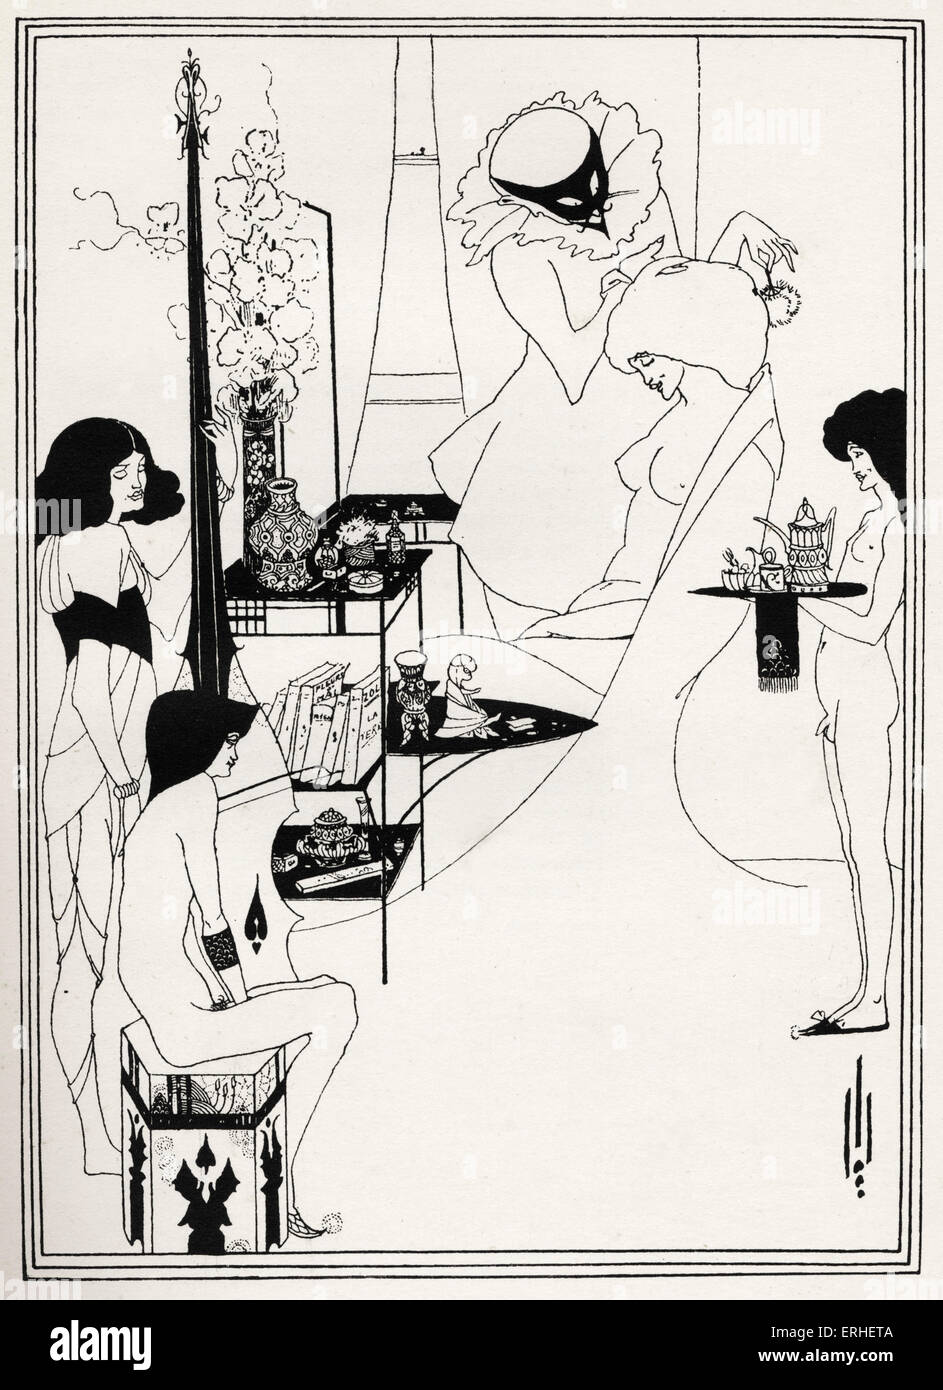 The Toilette of Salome II ' - Aubrey Beardsley 's illustration for ' Salome ' by Oscar Wilde first performed in England on 10 May 1905. Richard Strauss 's opera based on this play premiered 9 December 1905 Dresden. Stock Photo